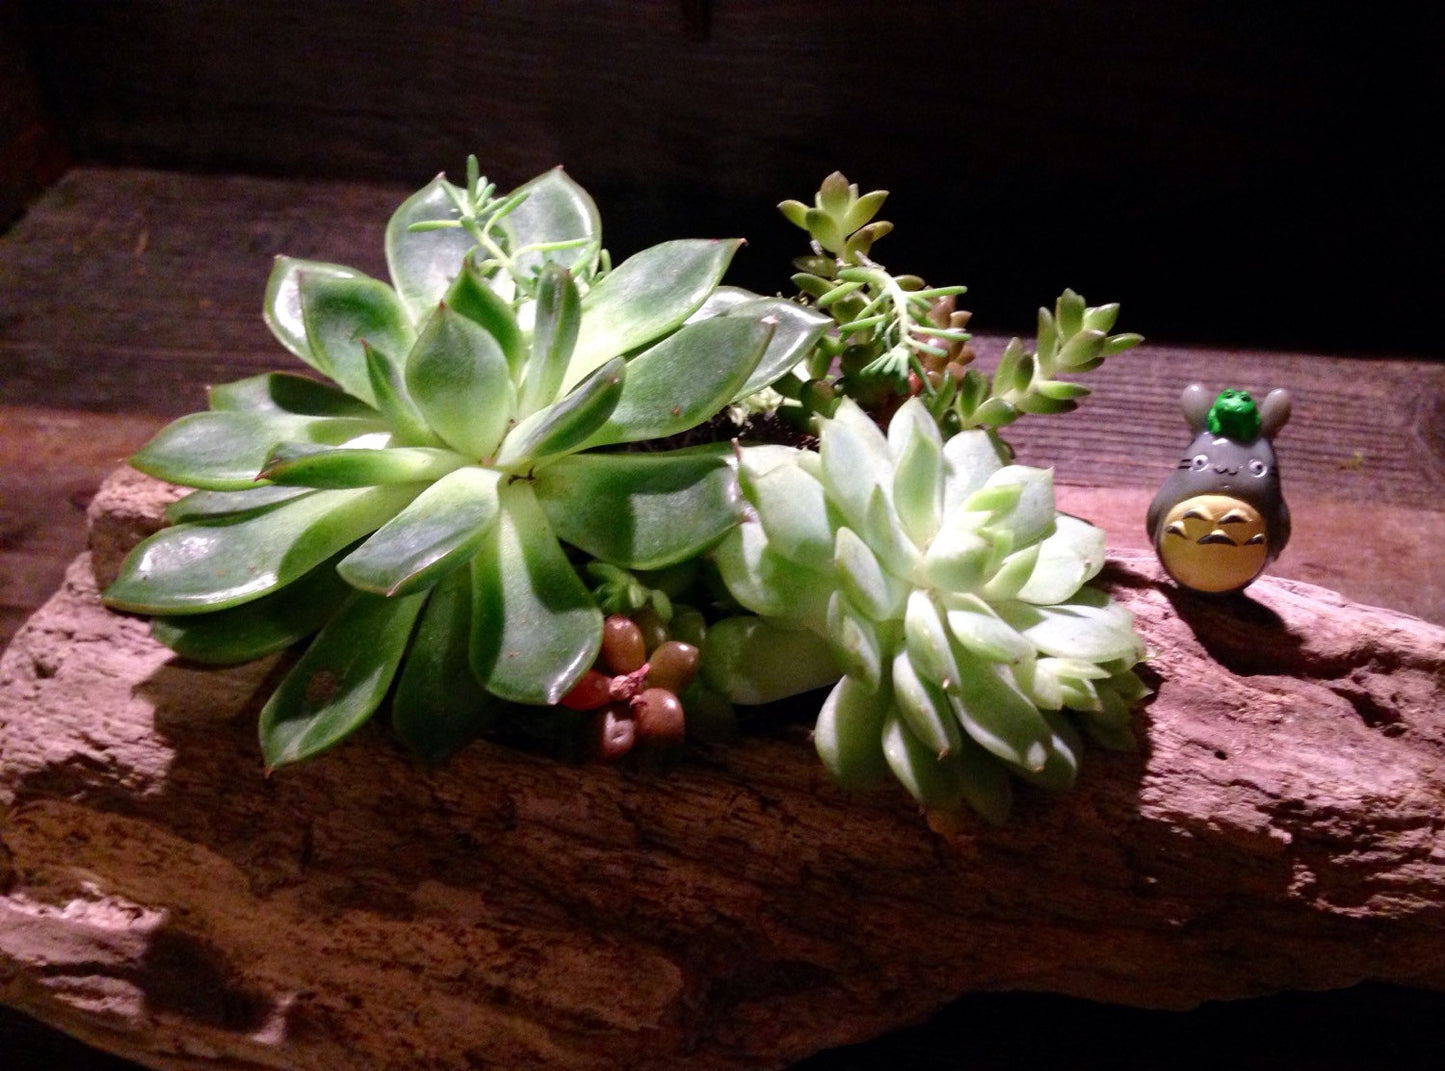 Driftwood succulent garden with totoro! Totoro's forest.